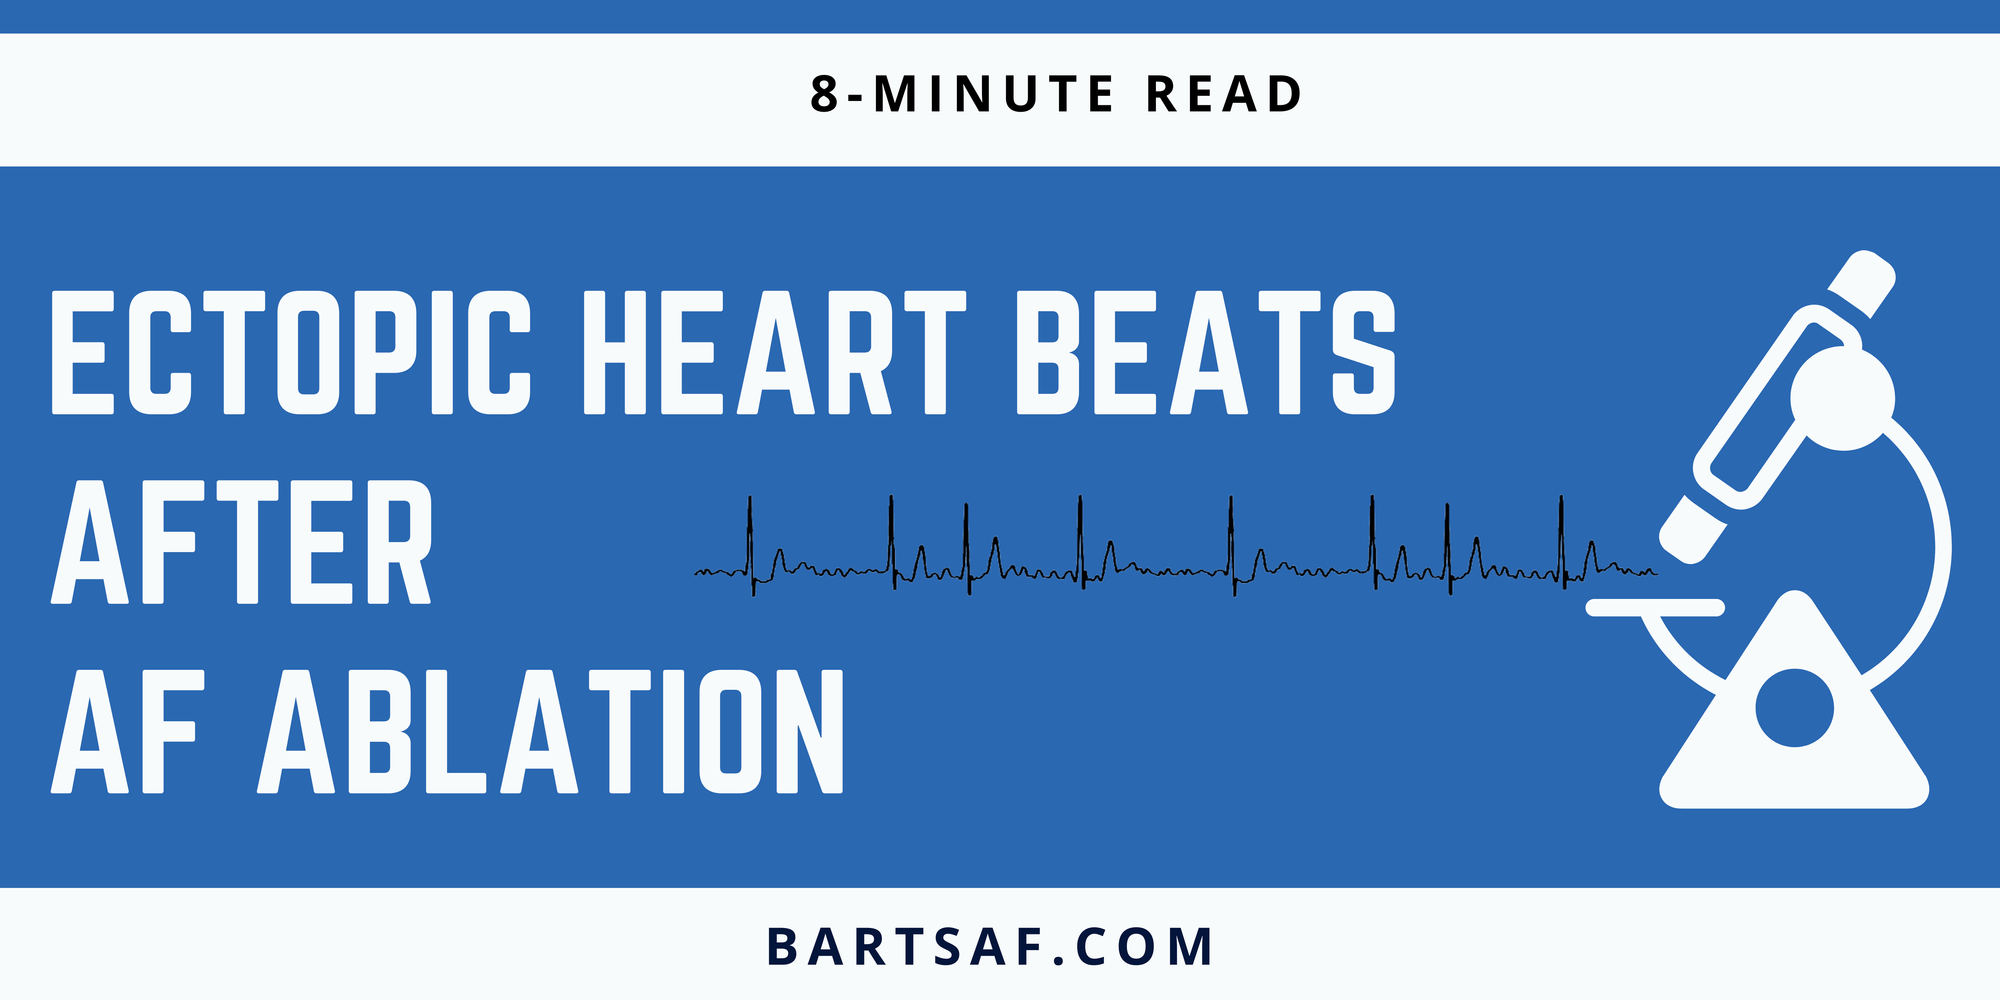 Extra heart beats after ablation